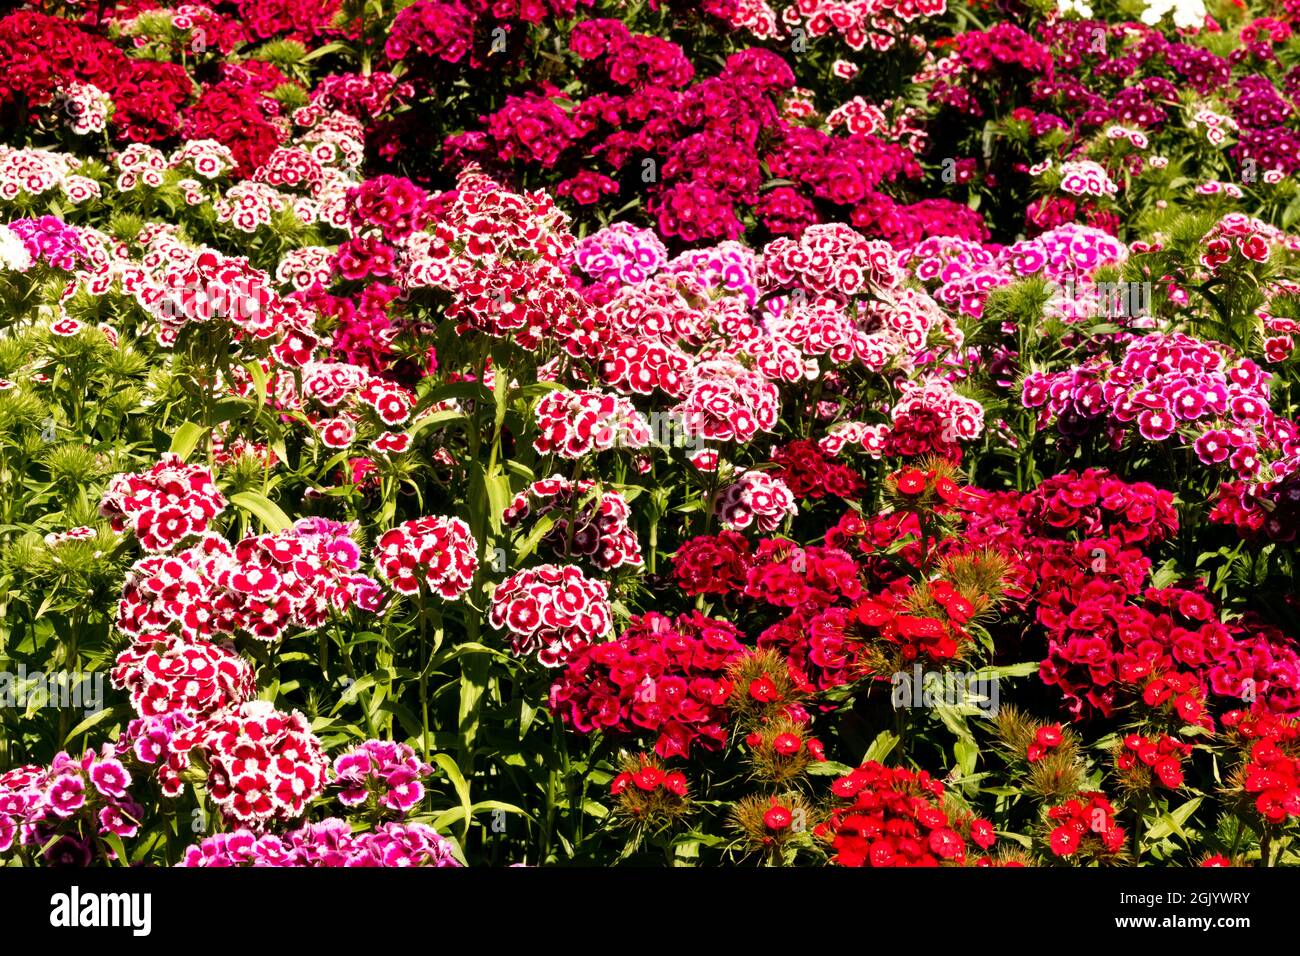 Colorful flower bed Dianthus Sweet William Stock Photo